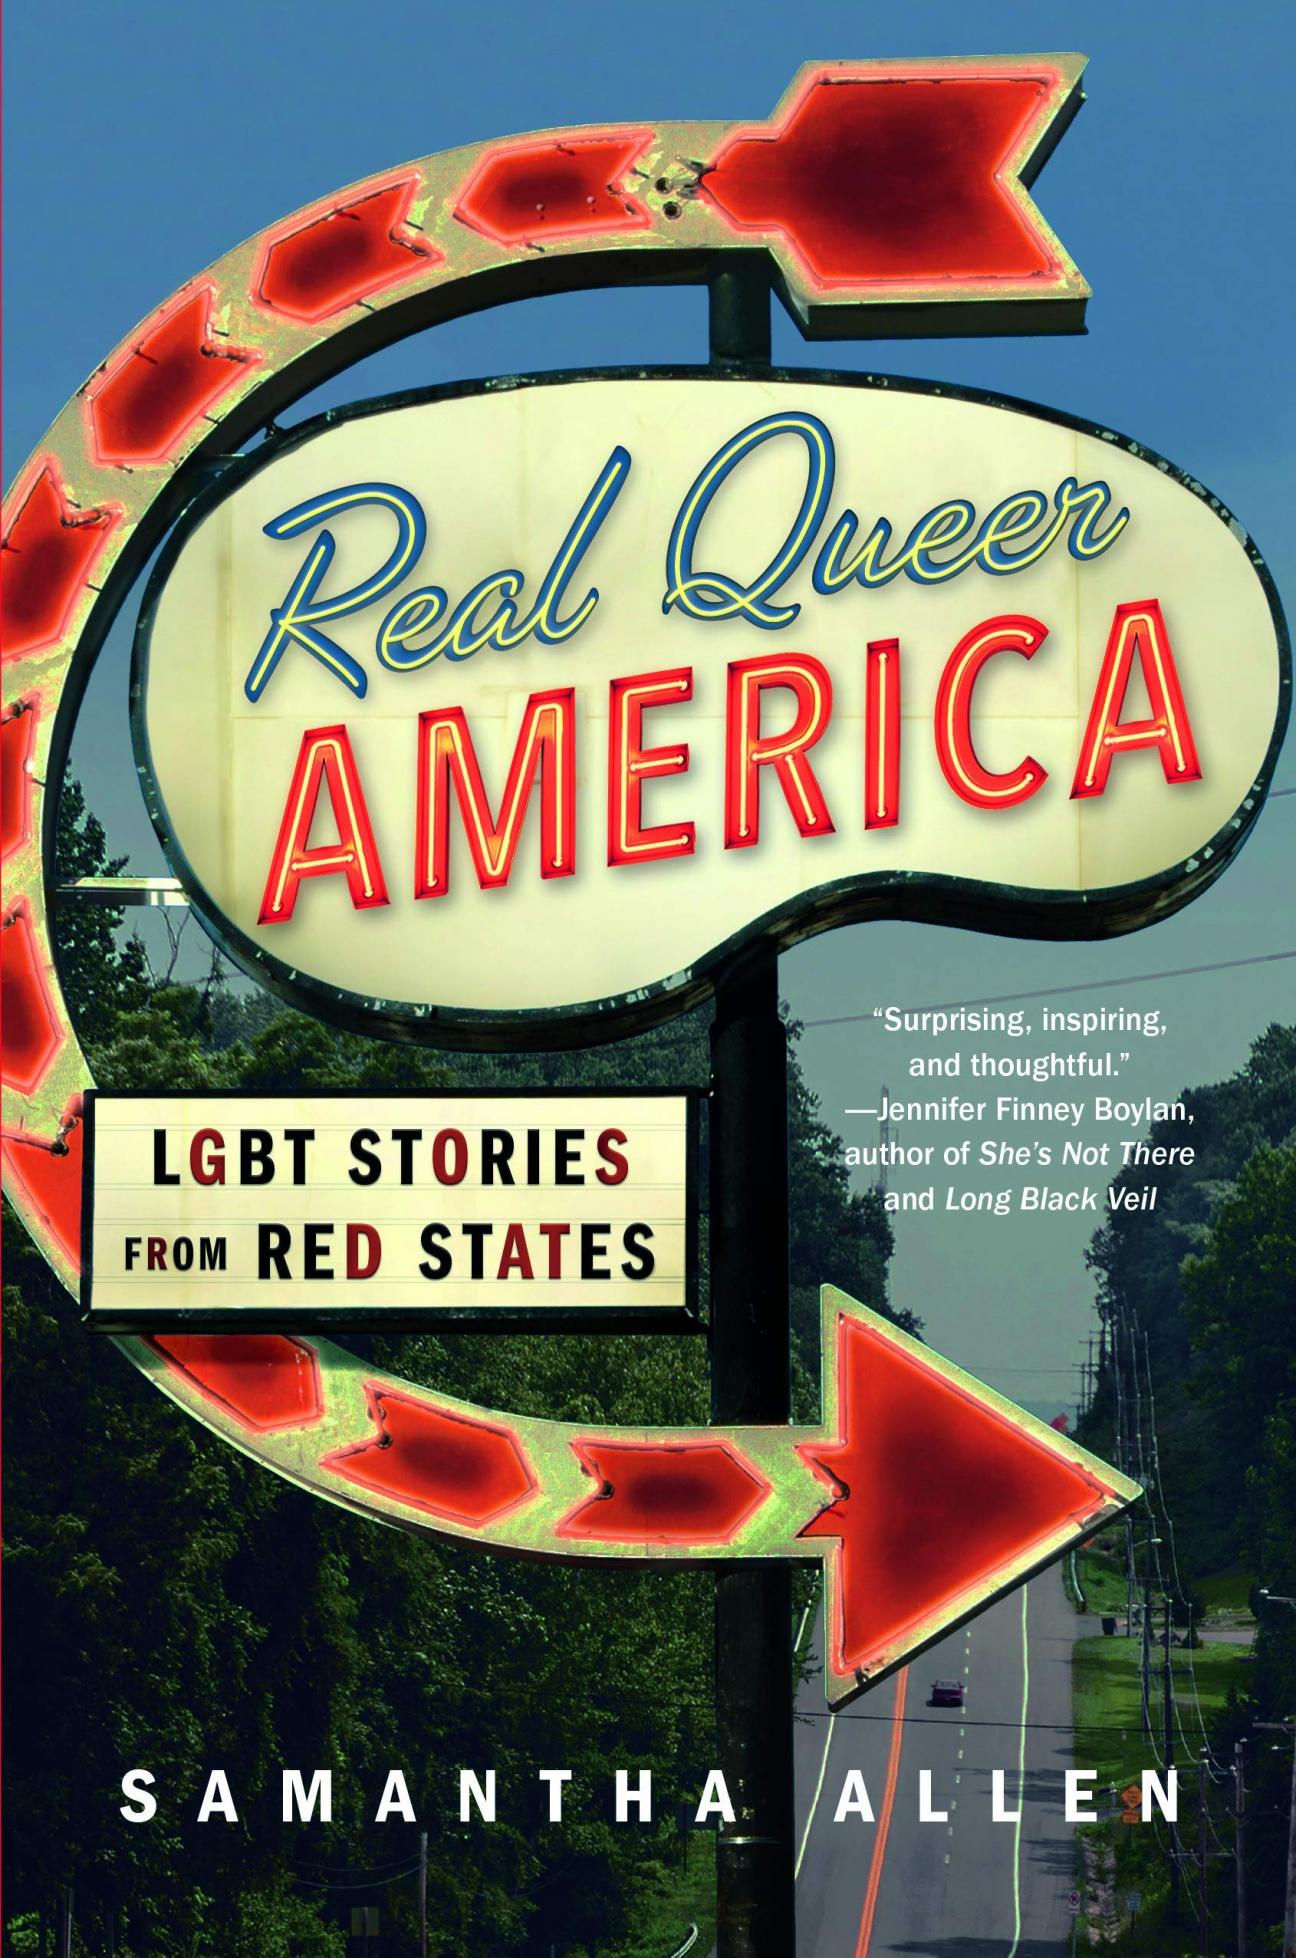 Cover of Real Queer America: LGBT STories from Red States by Samantha Allen